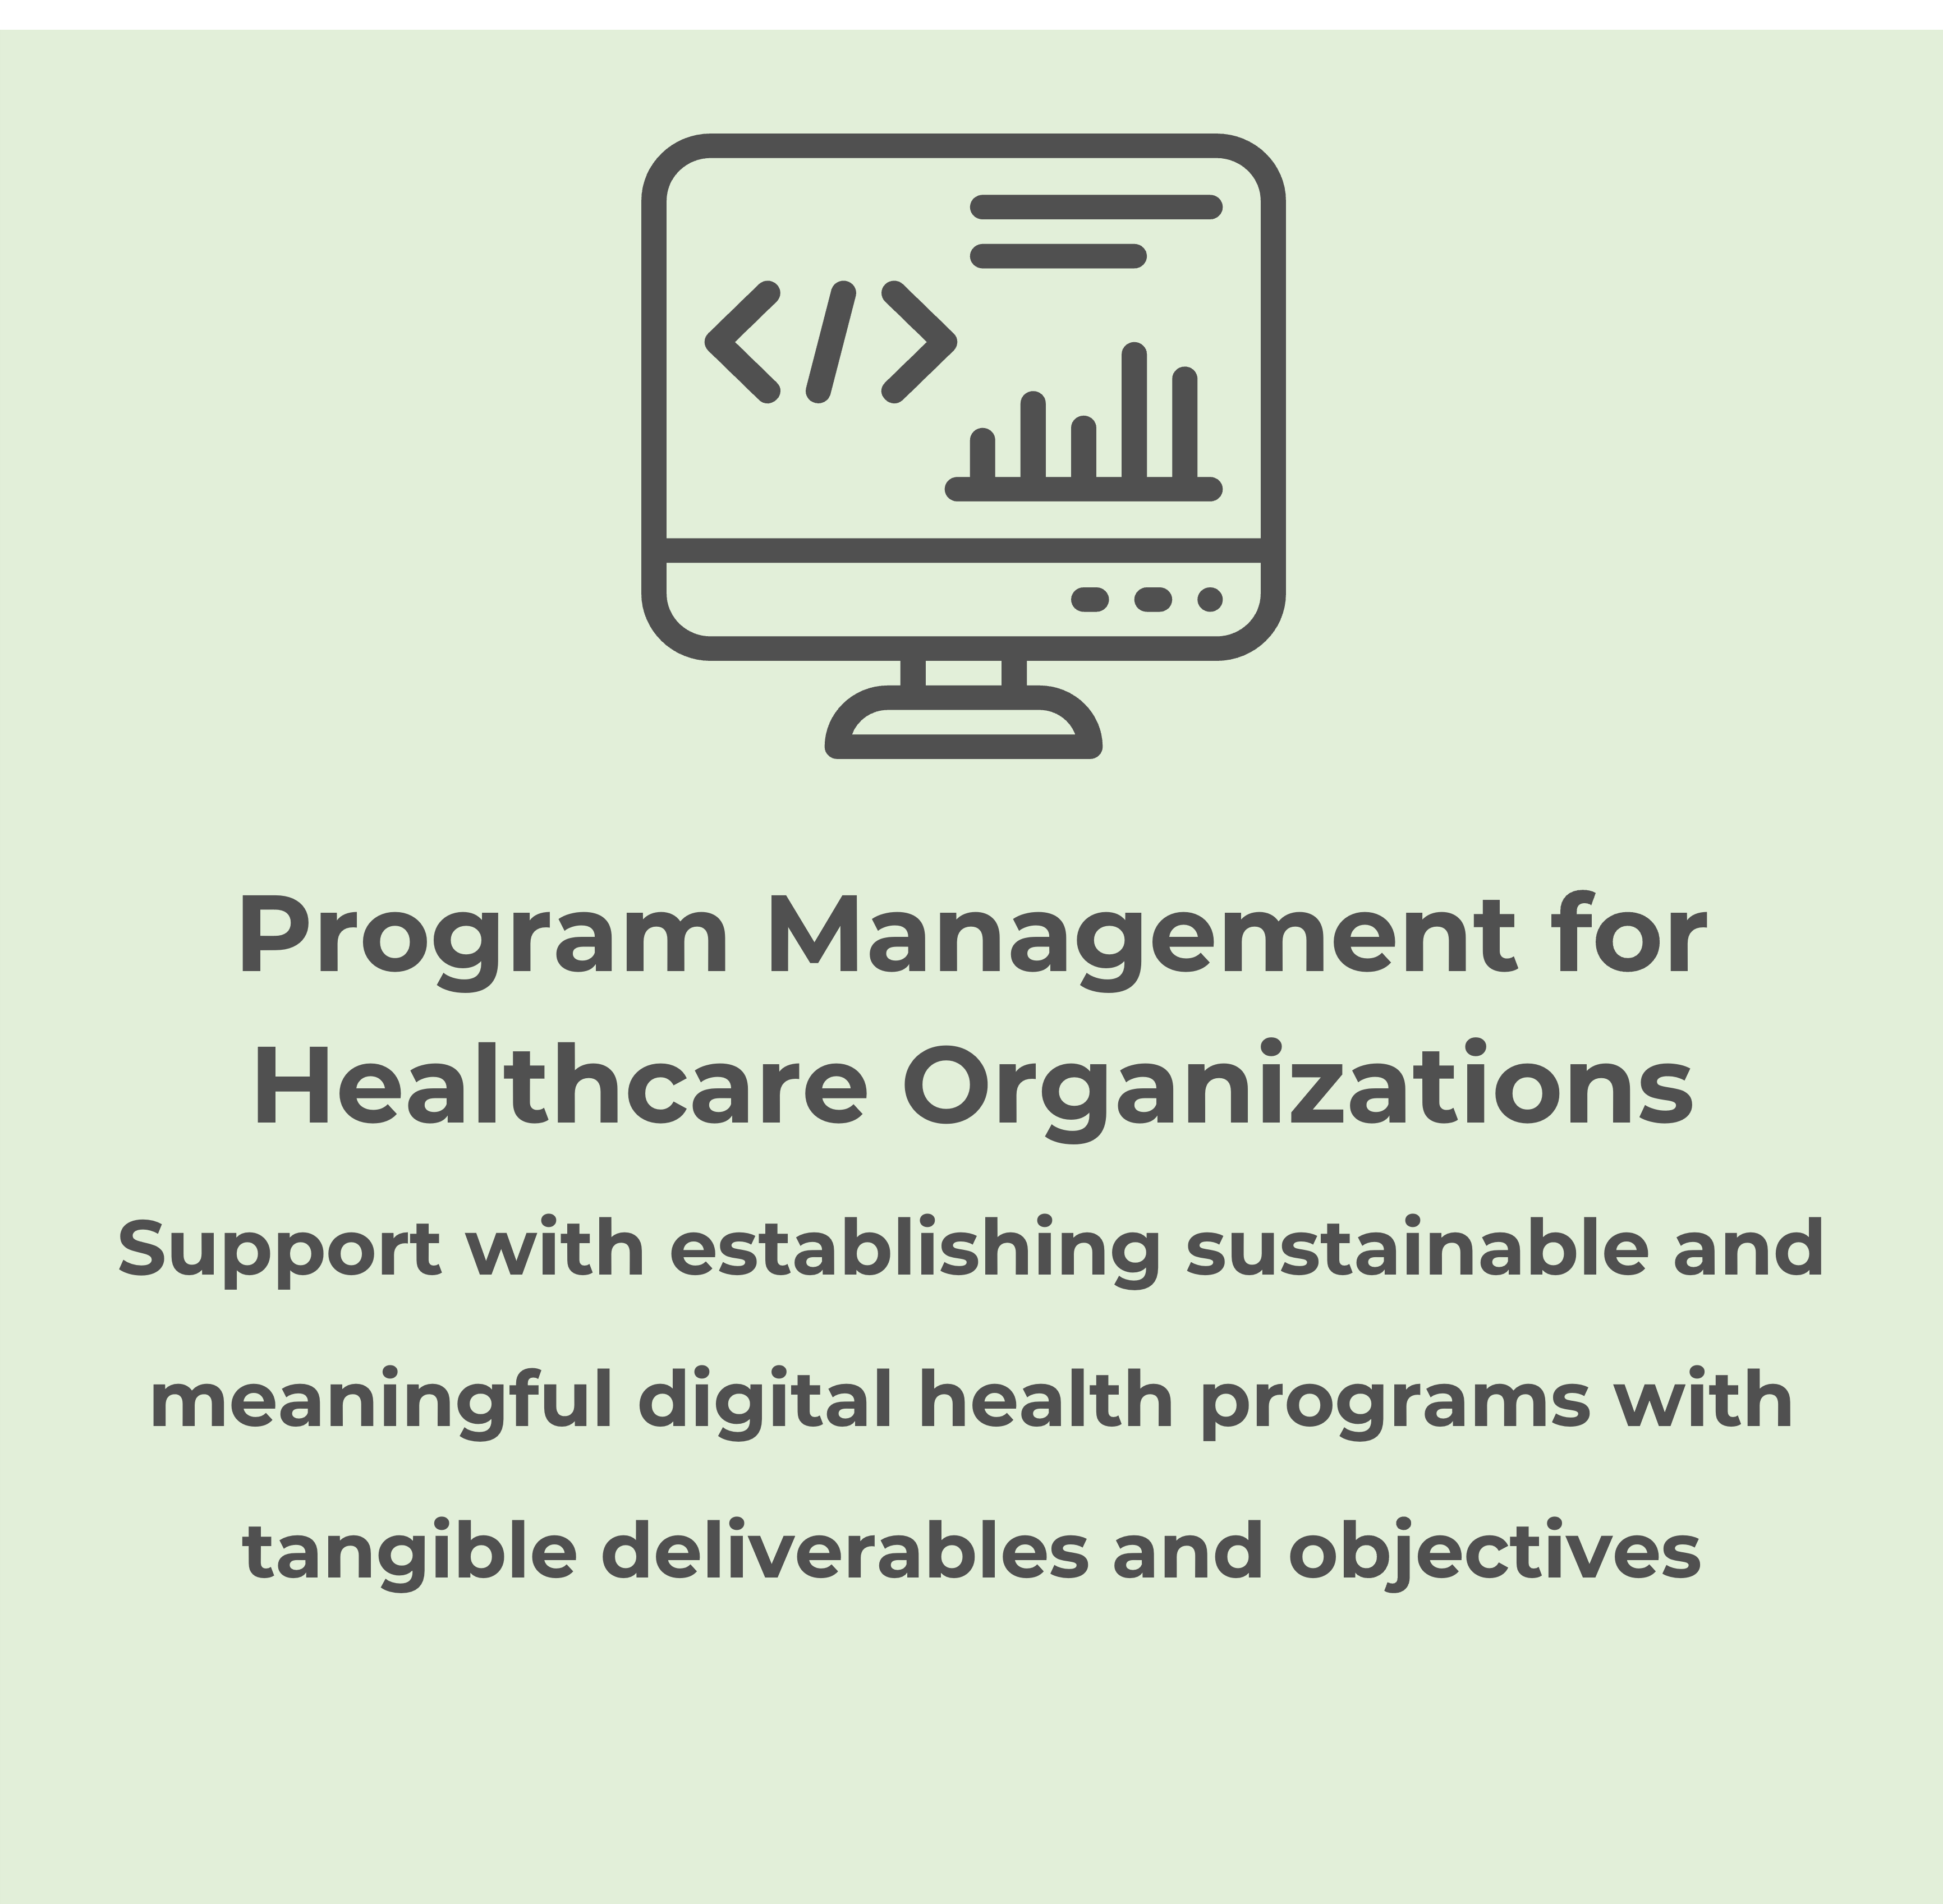 Program Management for Healthcare Organizations: Support with establishing sustainable and meaningful digital health programs with tangible deliverables and objectives